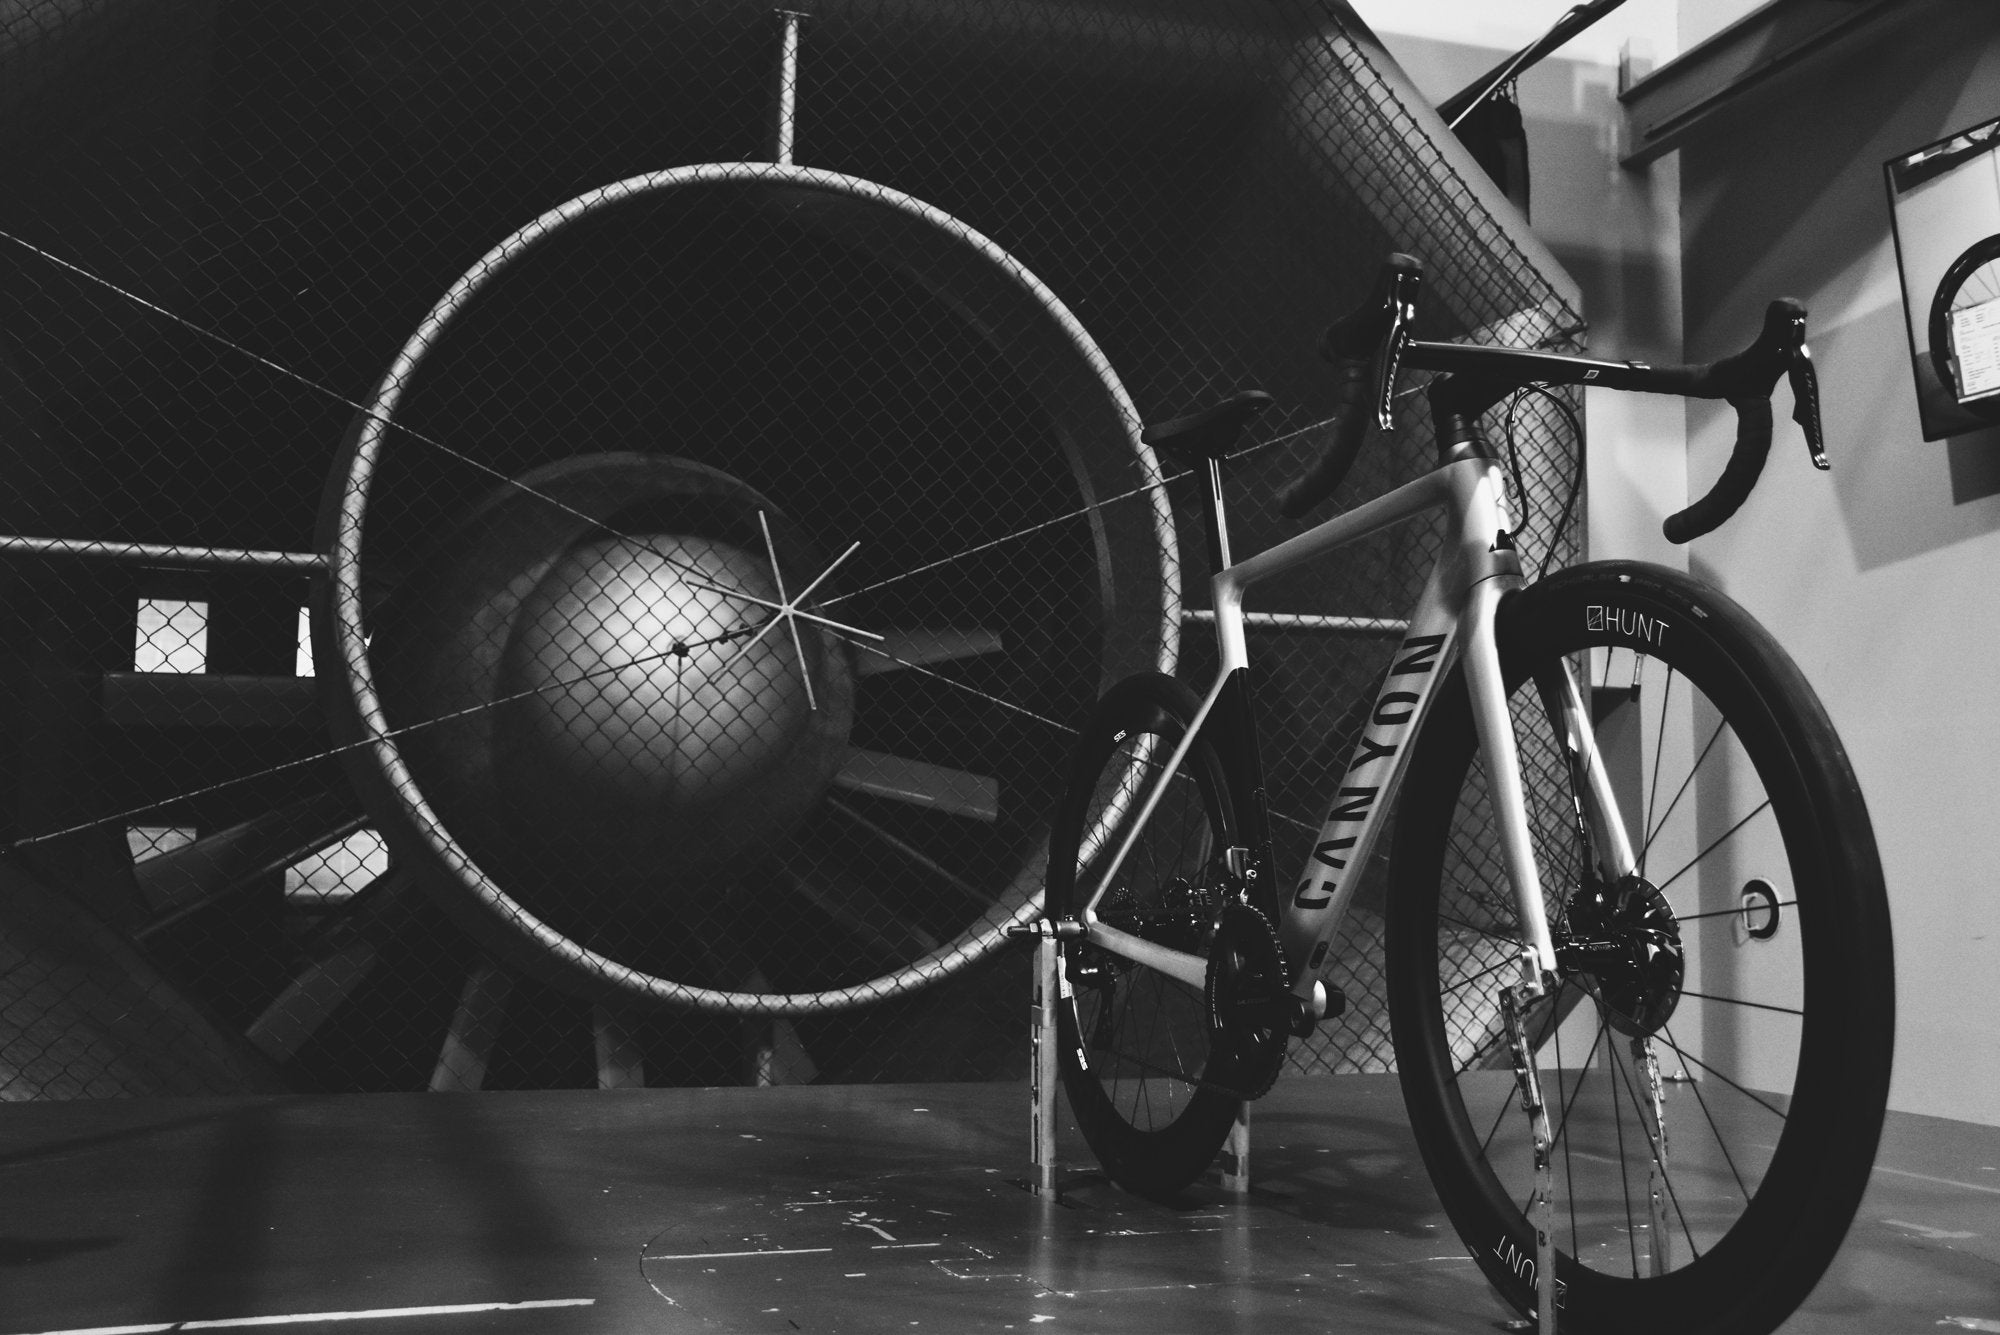 <h1>Wind Tunnel Tested</h1><i>Developed by Luisa Grappone, with years in the wind tunnel spent testing every last detail. We've left no stone unturned in designing this wheelset from the ground up to be very fastest in the world within its class.</i>